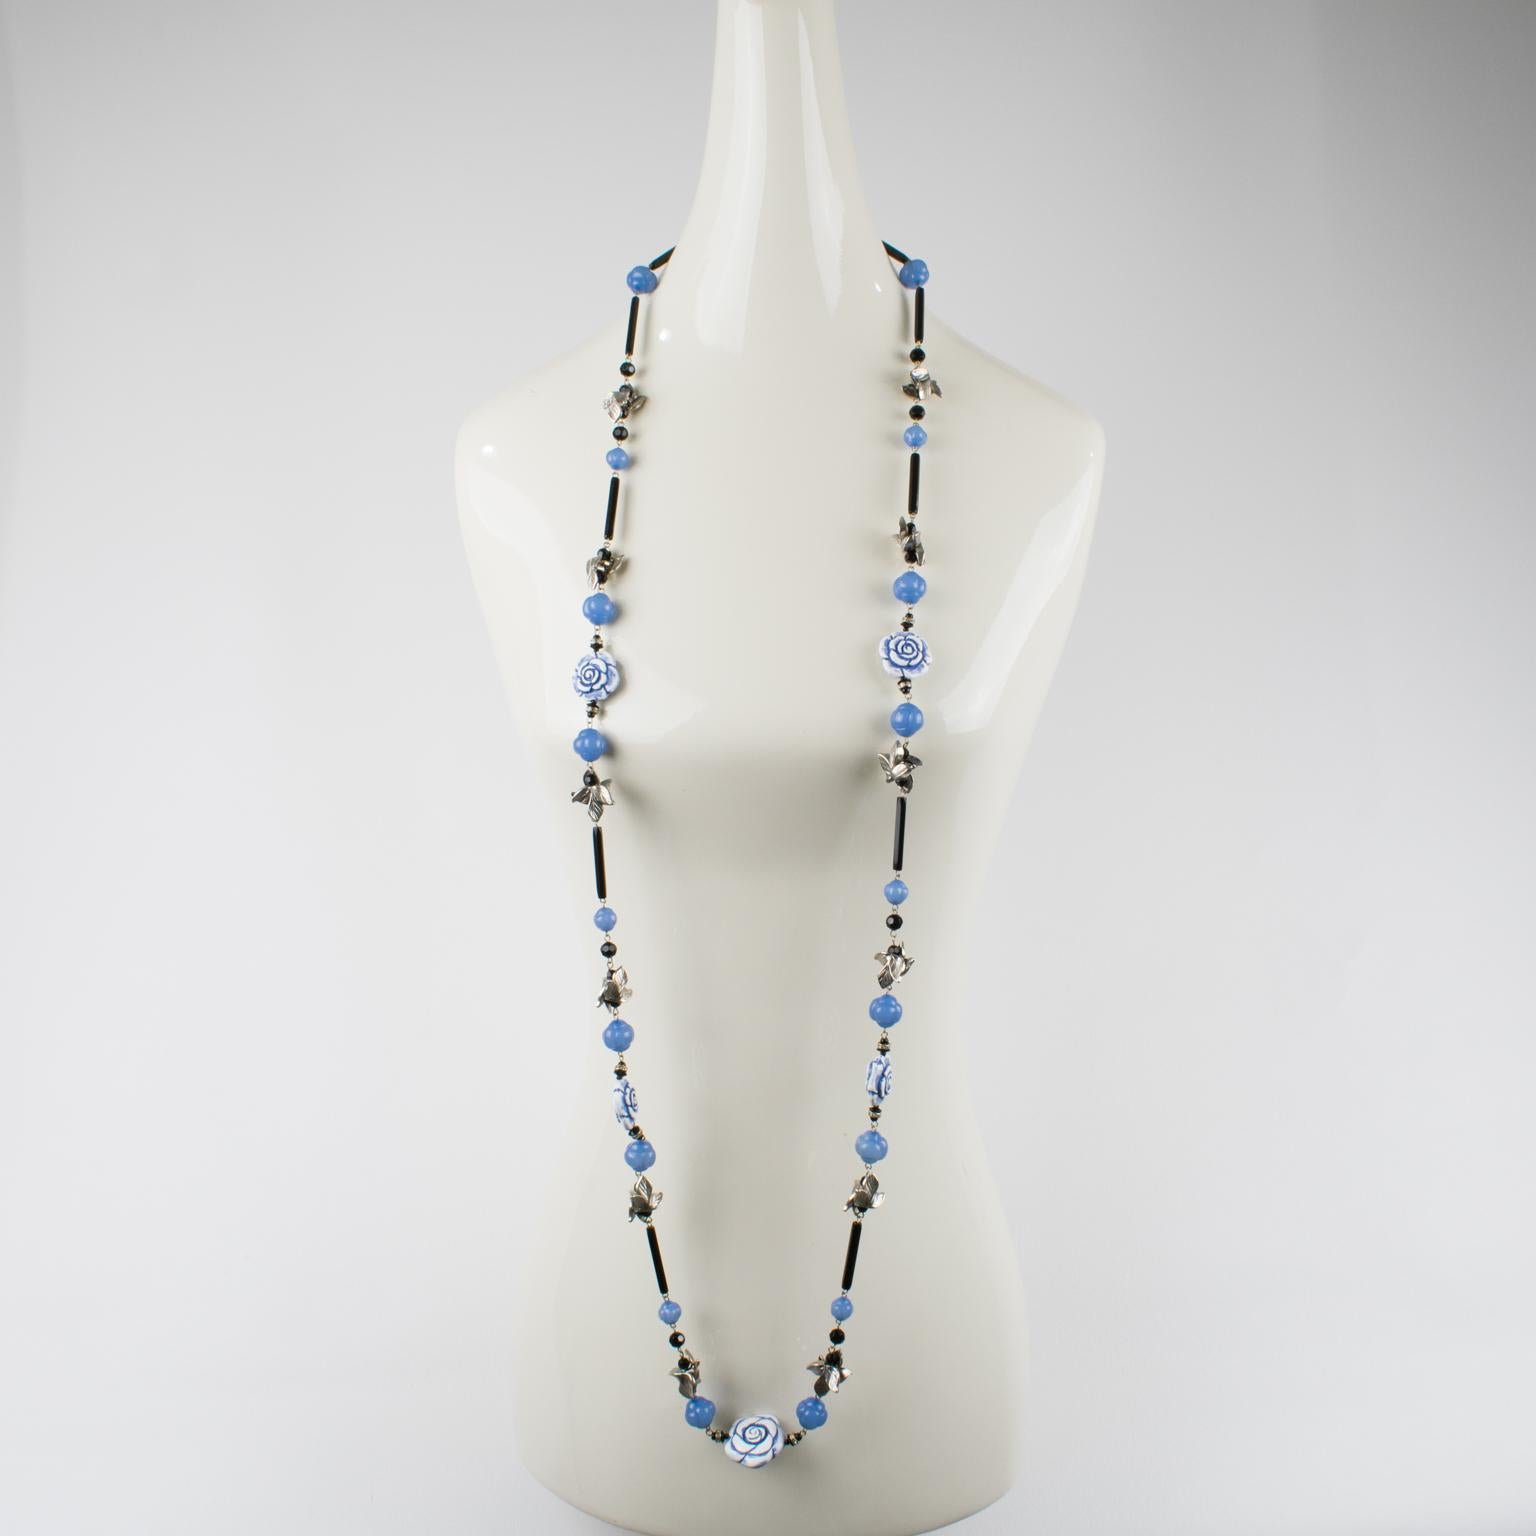 Modern Angela Caputi Long Necklace Lavender Blue Roses and Silver Resin Leaves For Sale